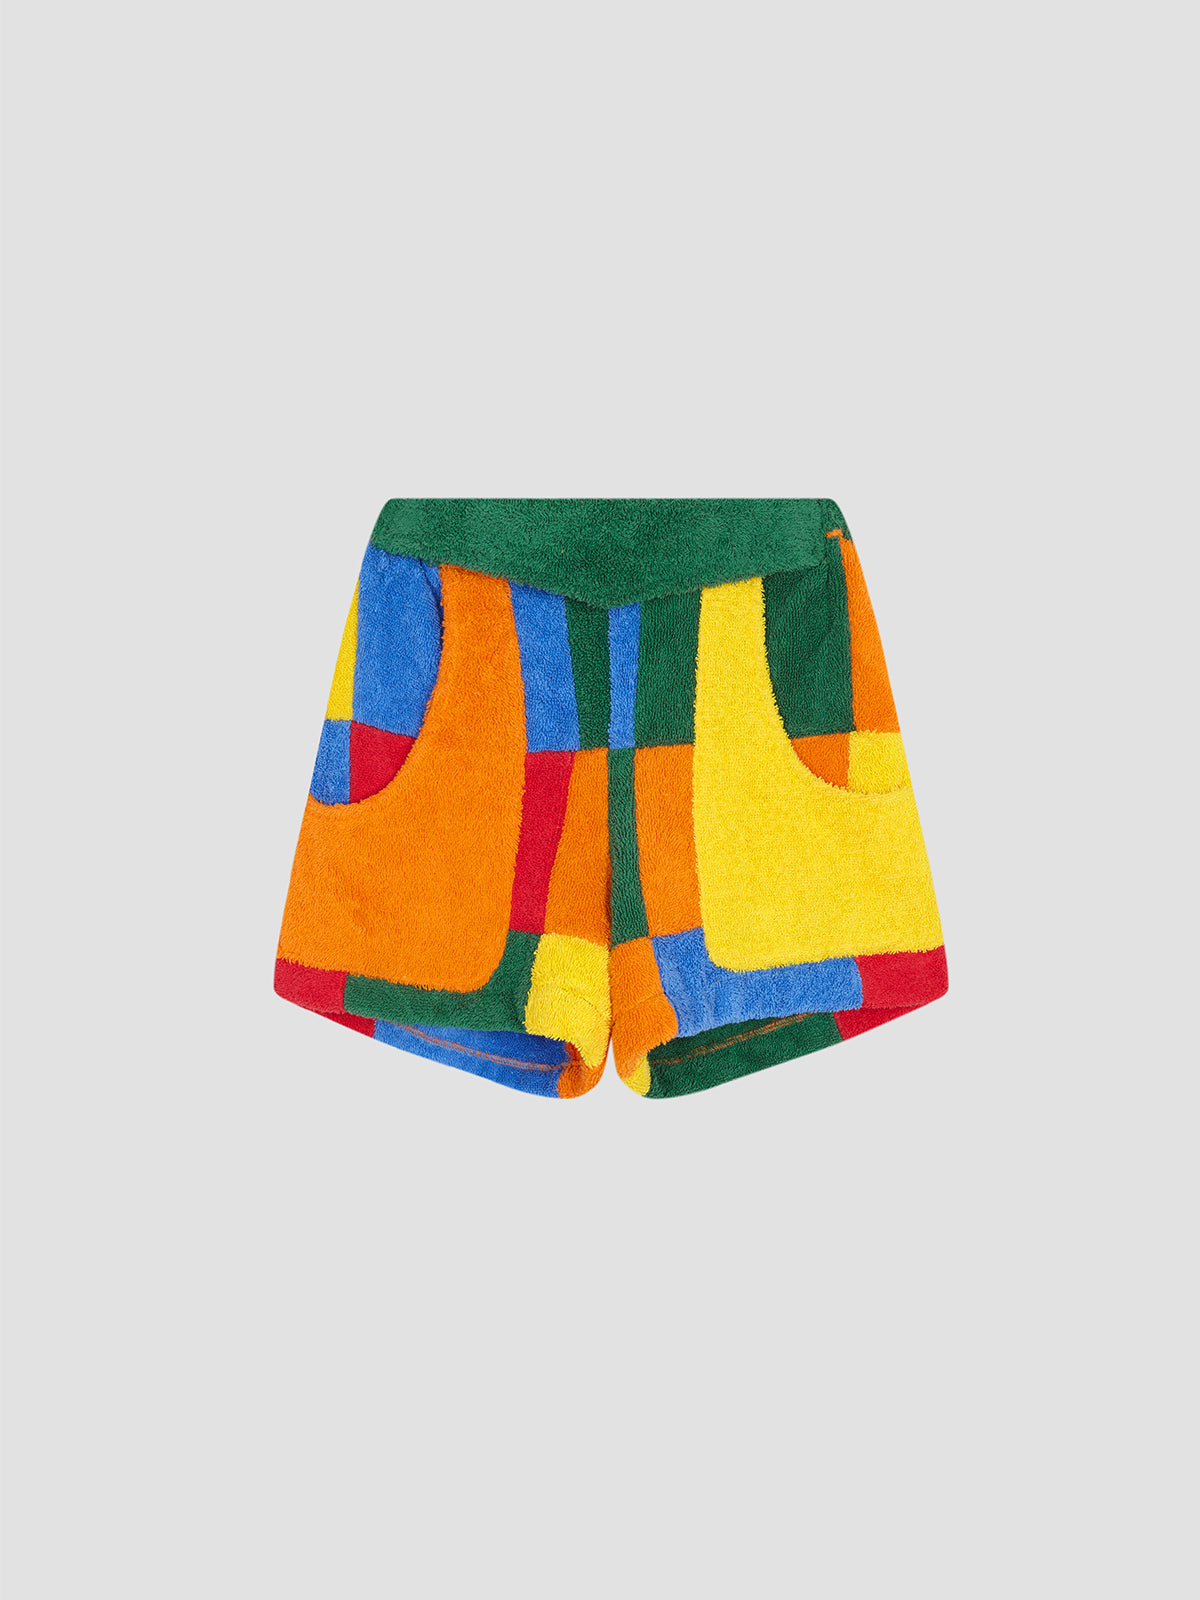 Color: Multicolor.  Multicolor shorts made of towel fabric.  Regular fit.  Short length. Medium waist.  Elastic waistband. It has two side pockets.